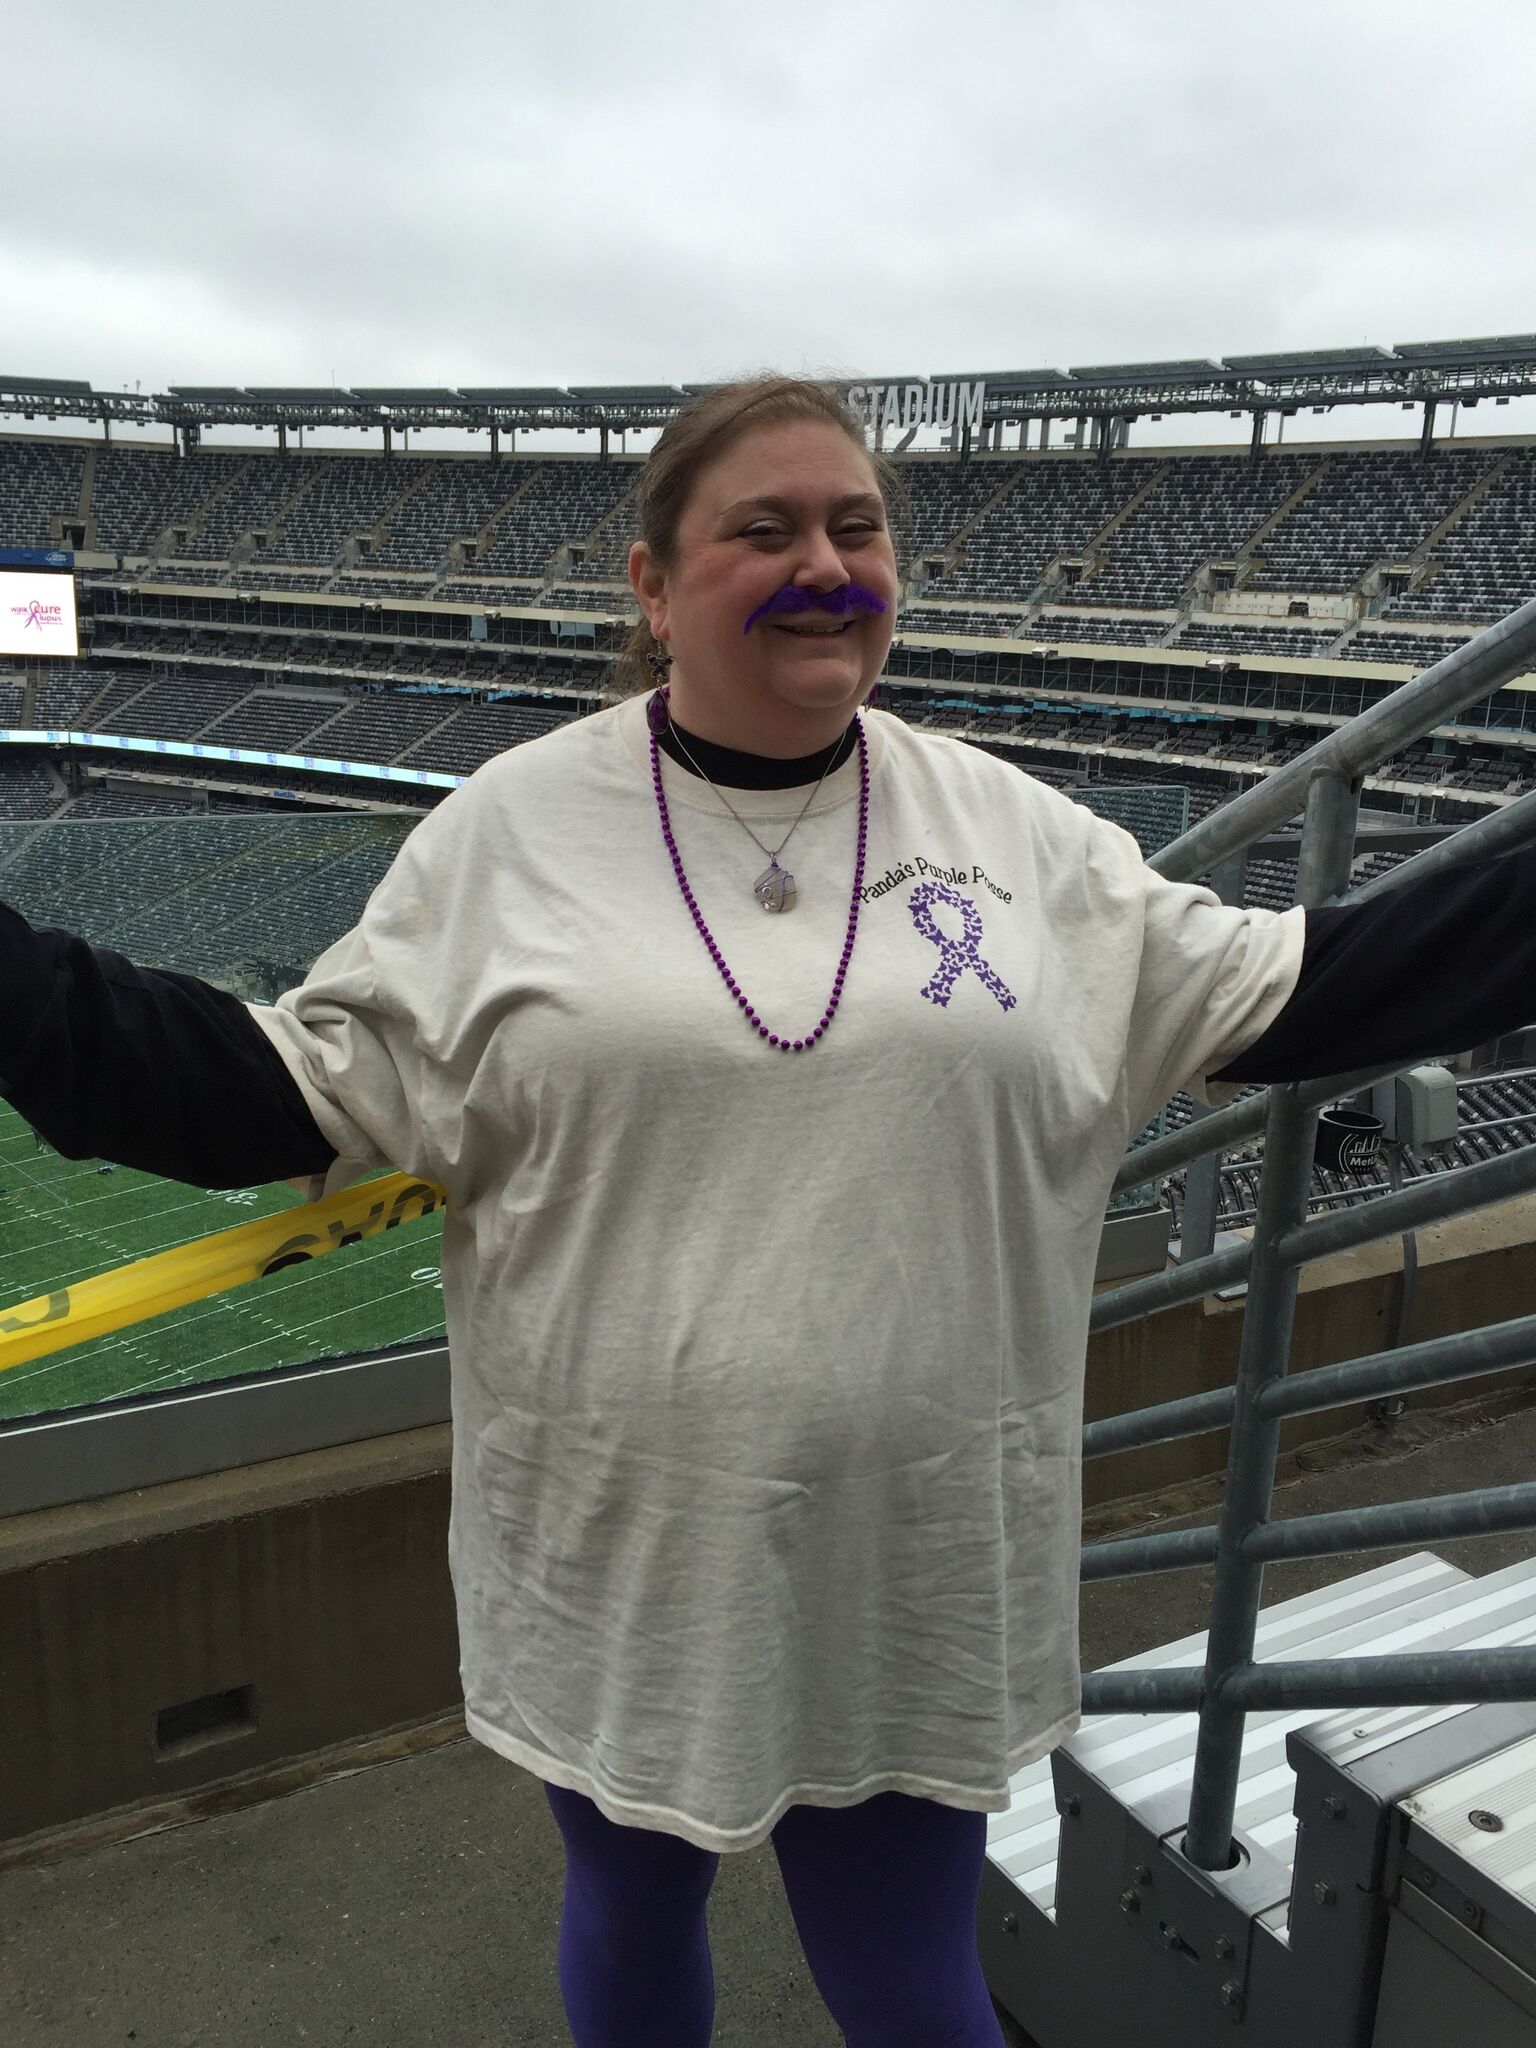 woman wearing a lupus awareness tshirt and standing in a baseball stadium